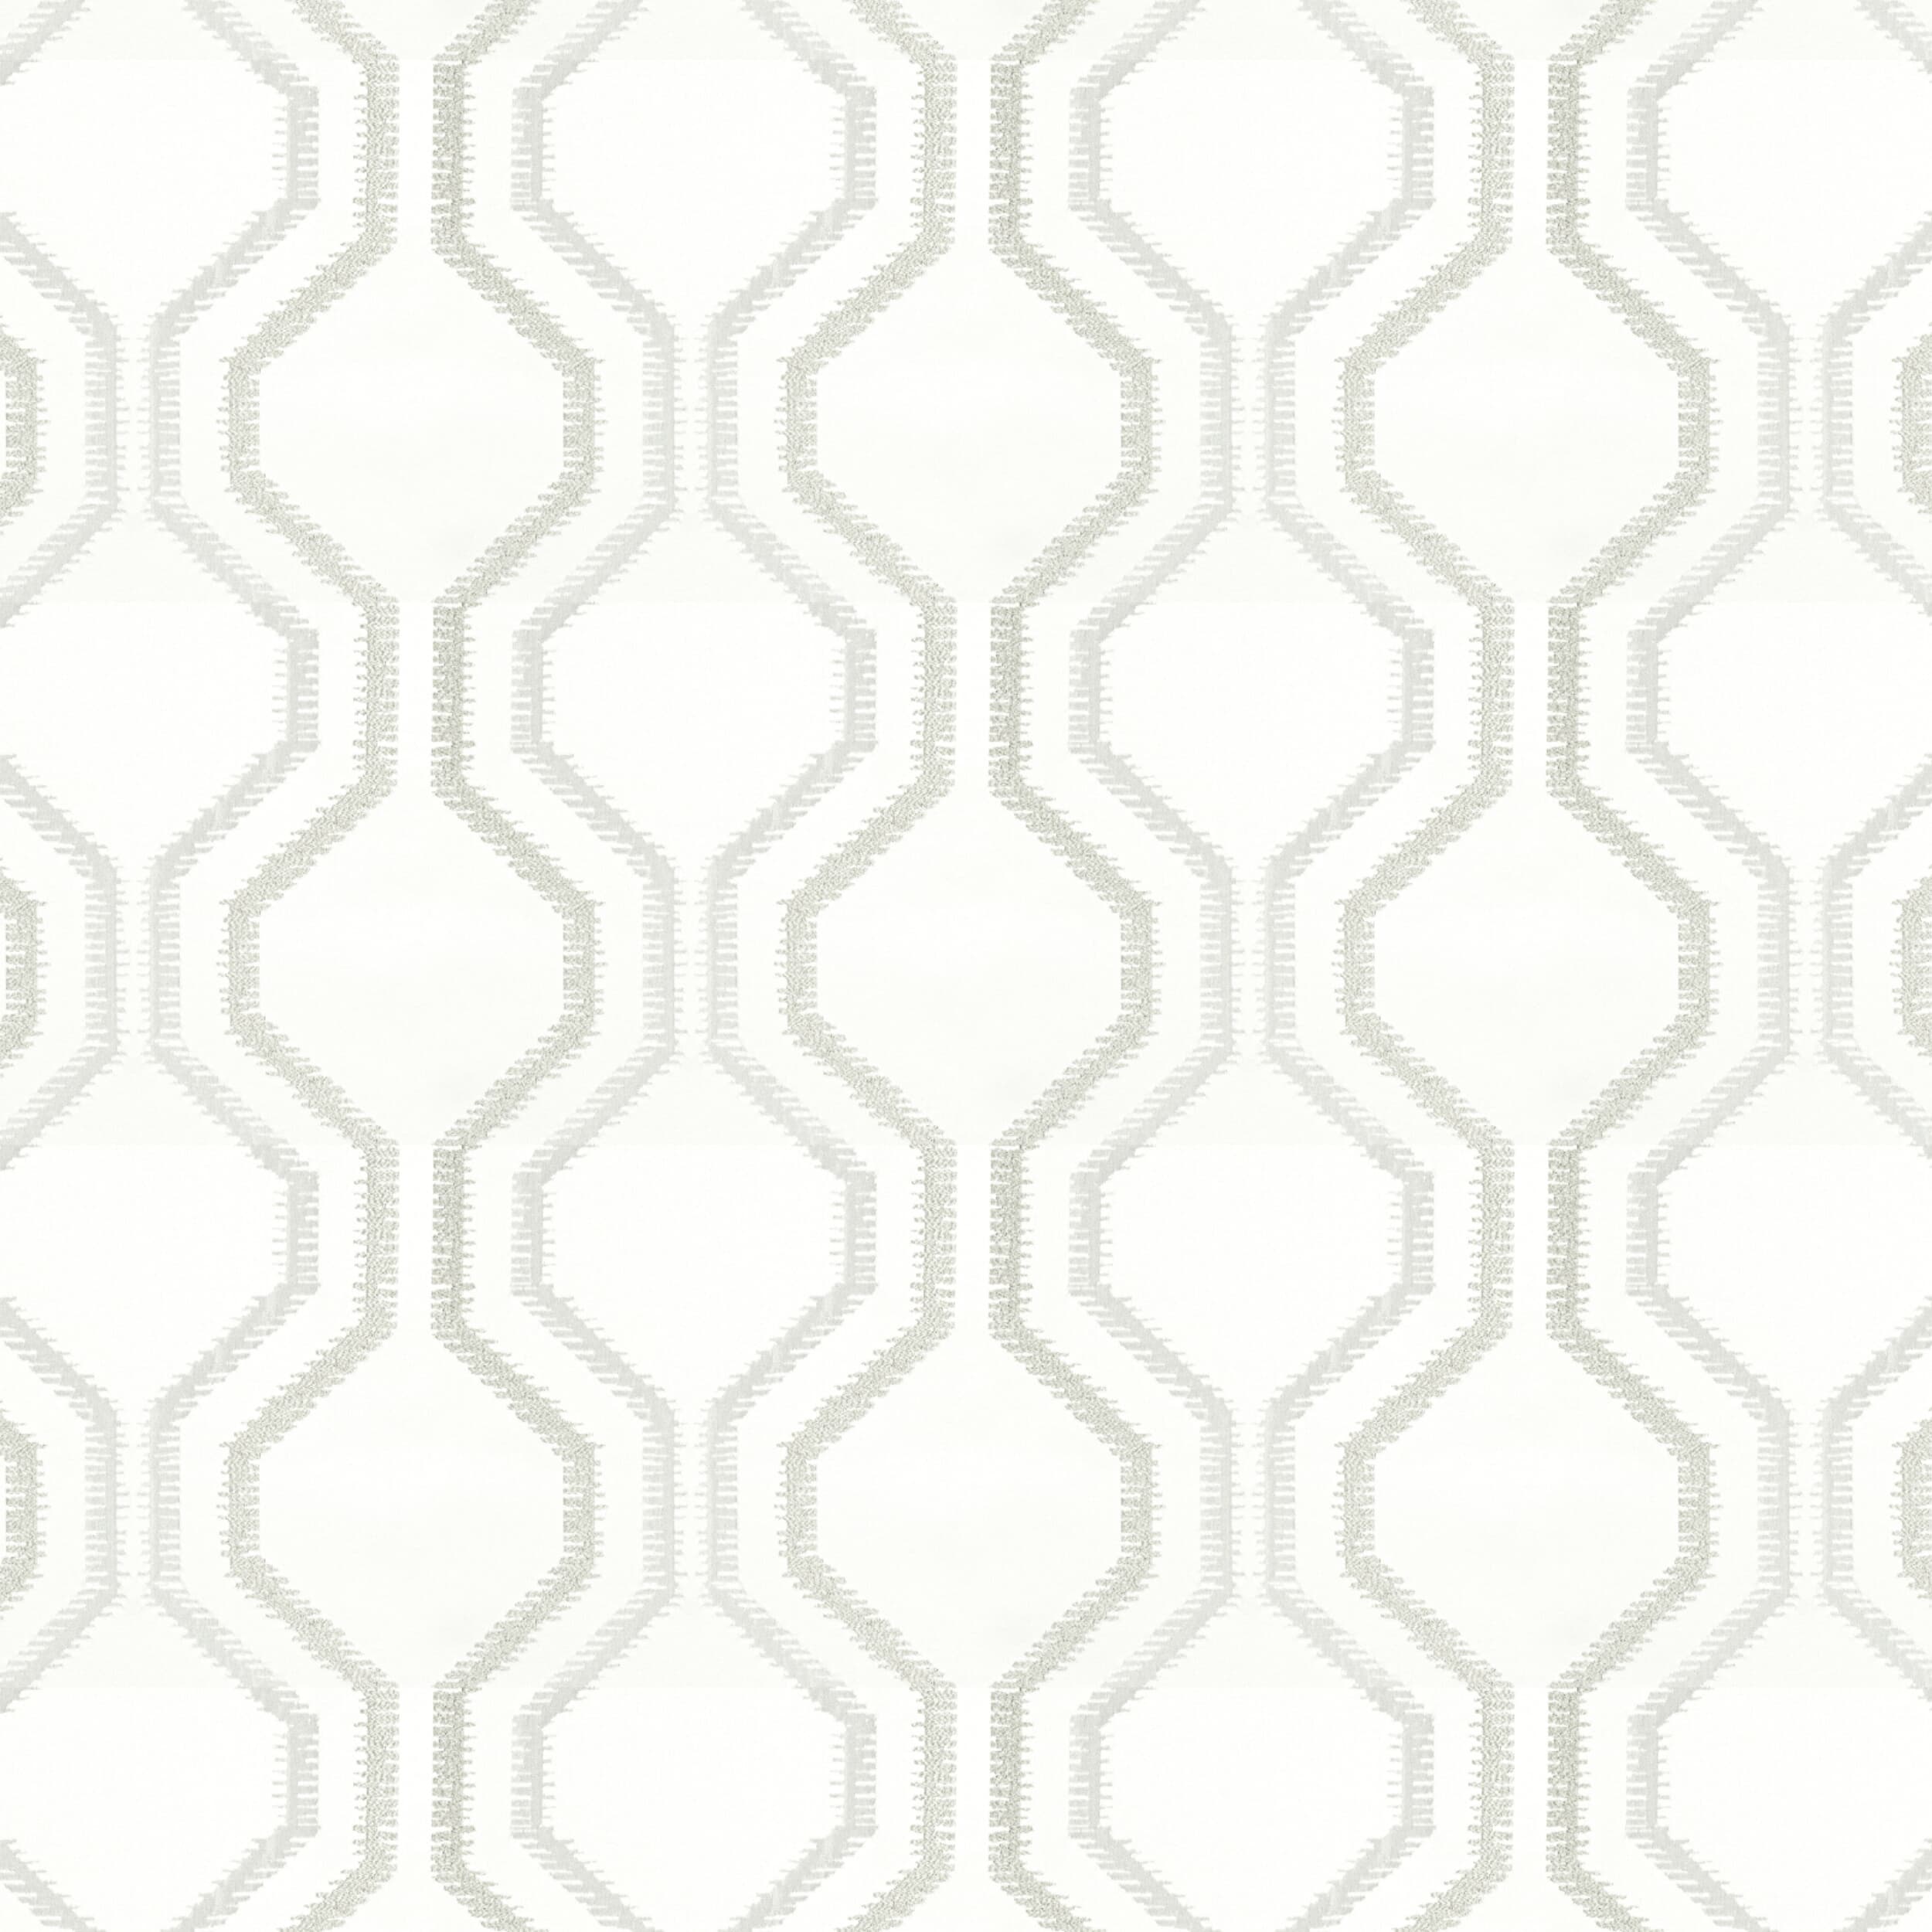 Agile 3 Silver by Stout Fabric